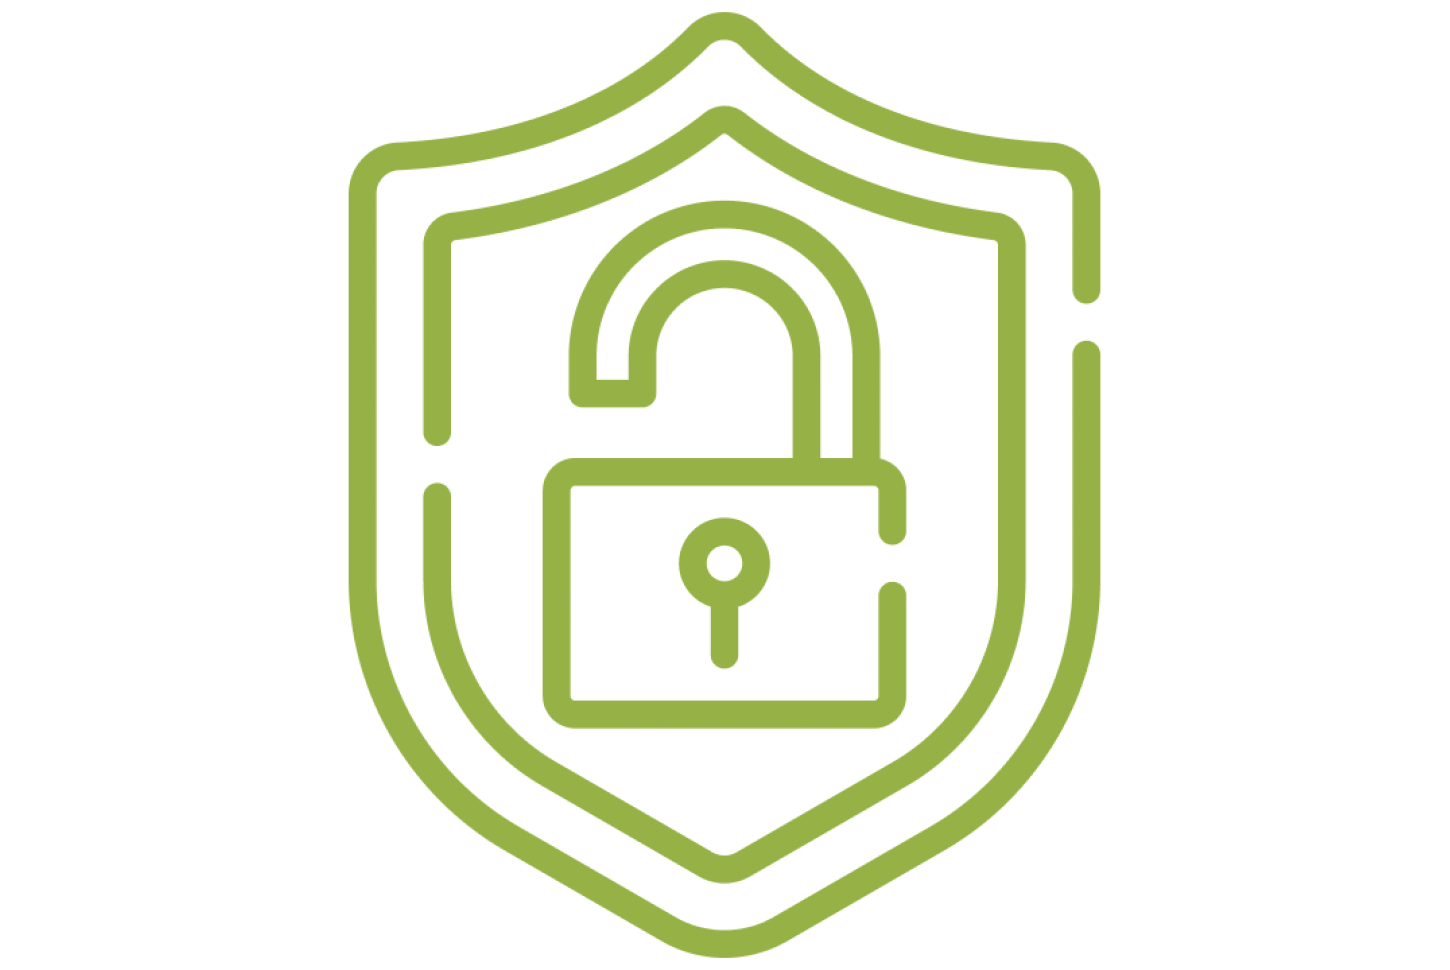 Use Secure Passwords icon - stylized icon of a lock